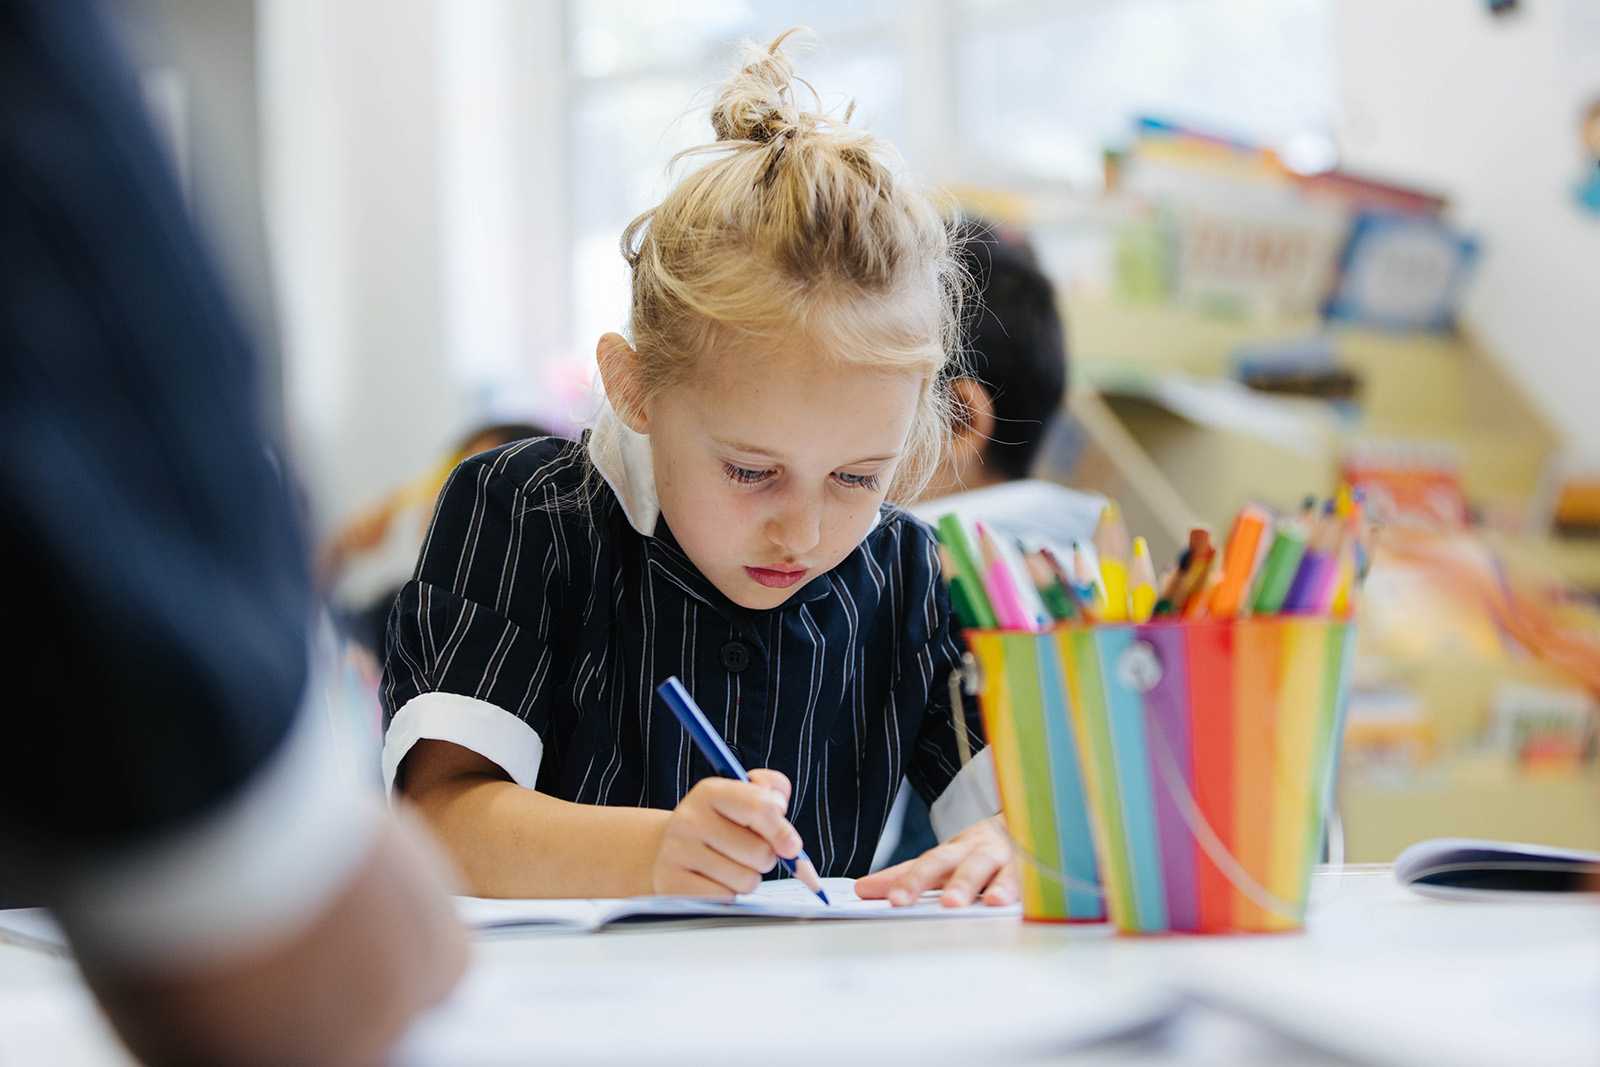 Focused primary school student in formal uniform, drawing with coloured pencils